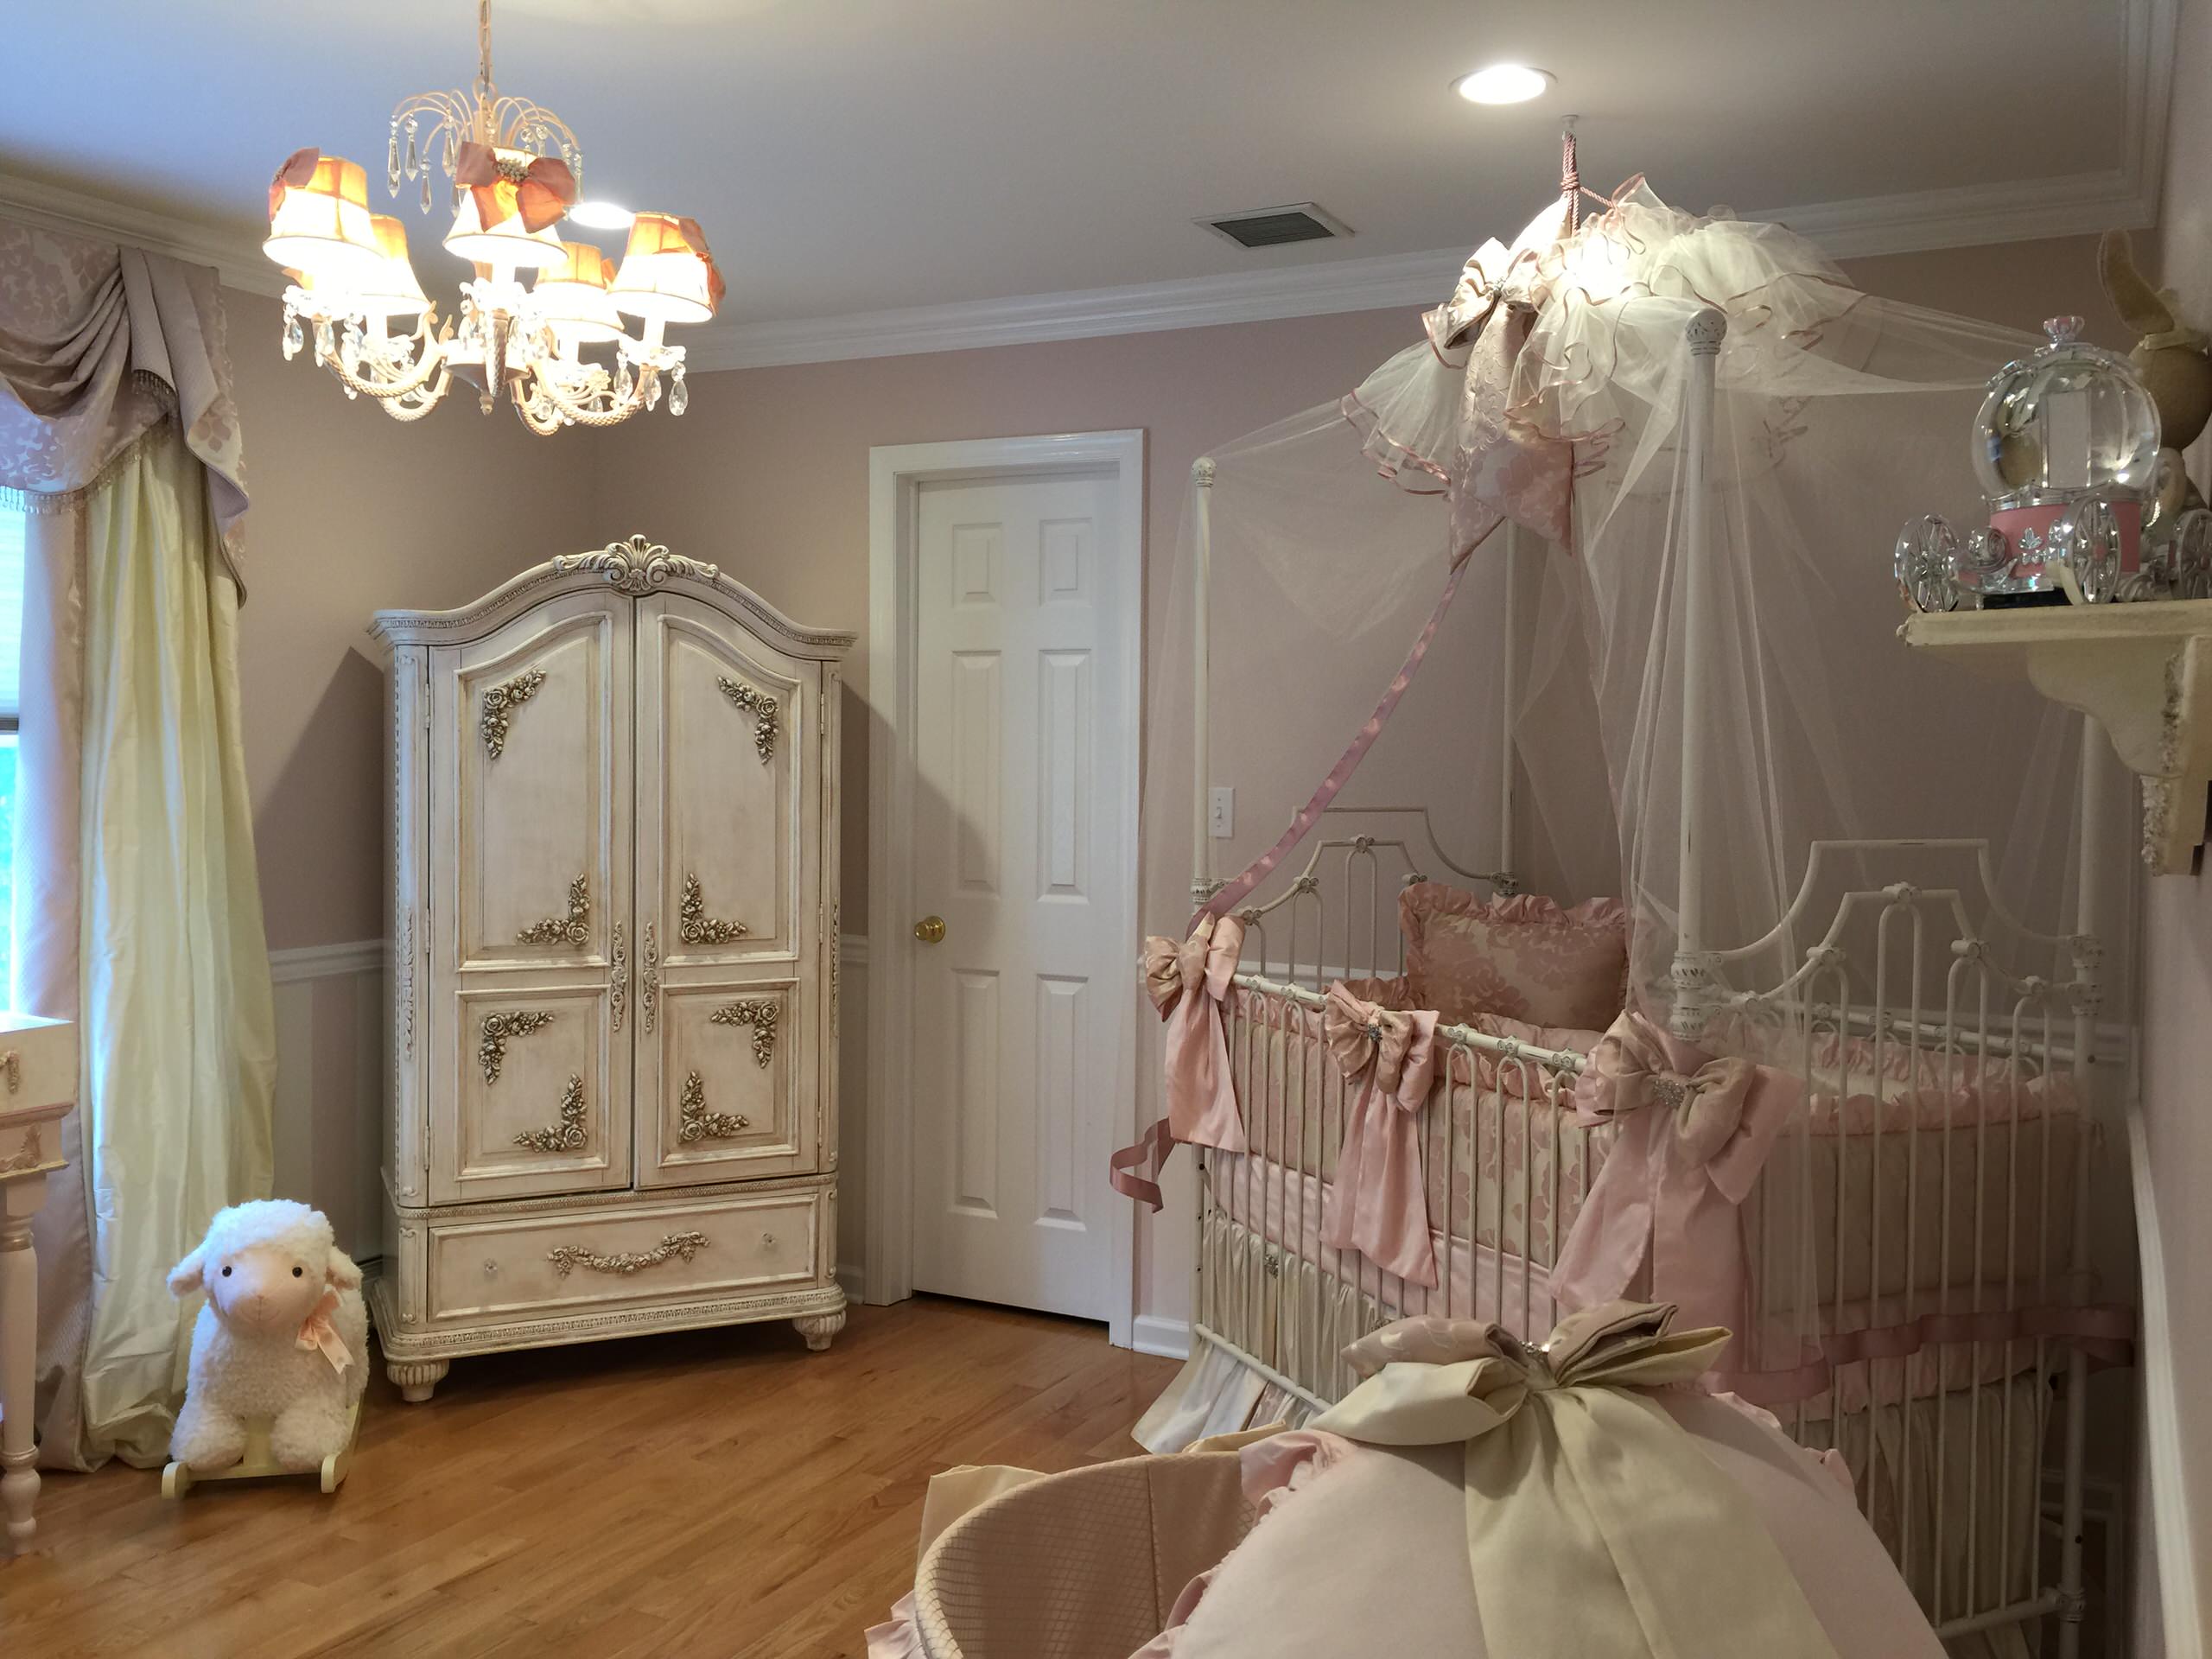 75 Beautiful Nursery Pictures Ideas Style Shabby Chic Style March 2021 Houzz